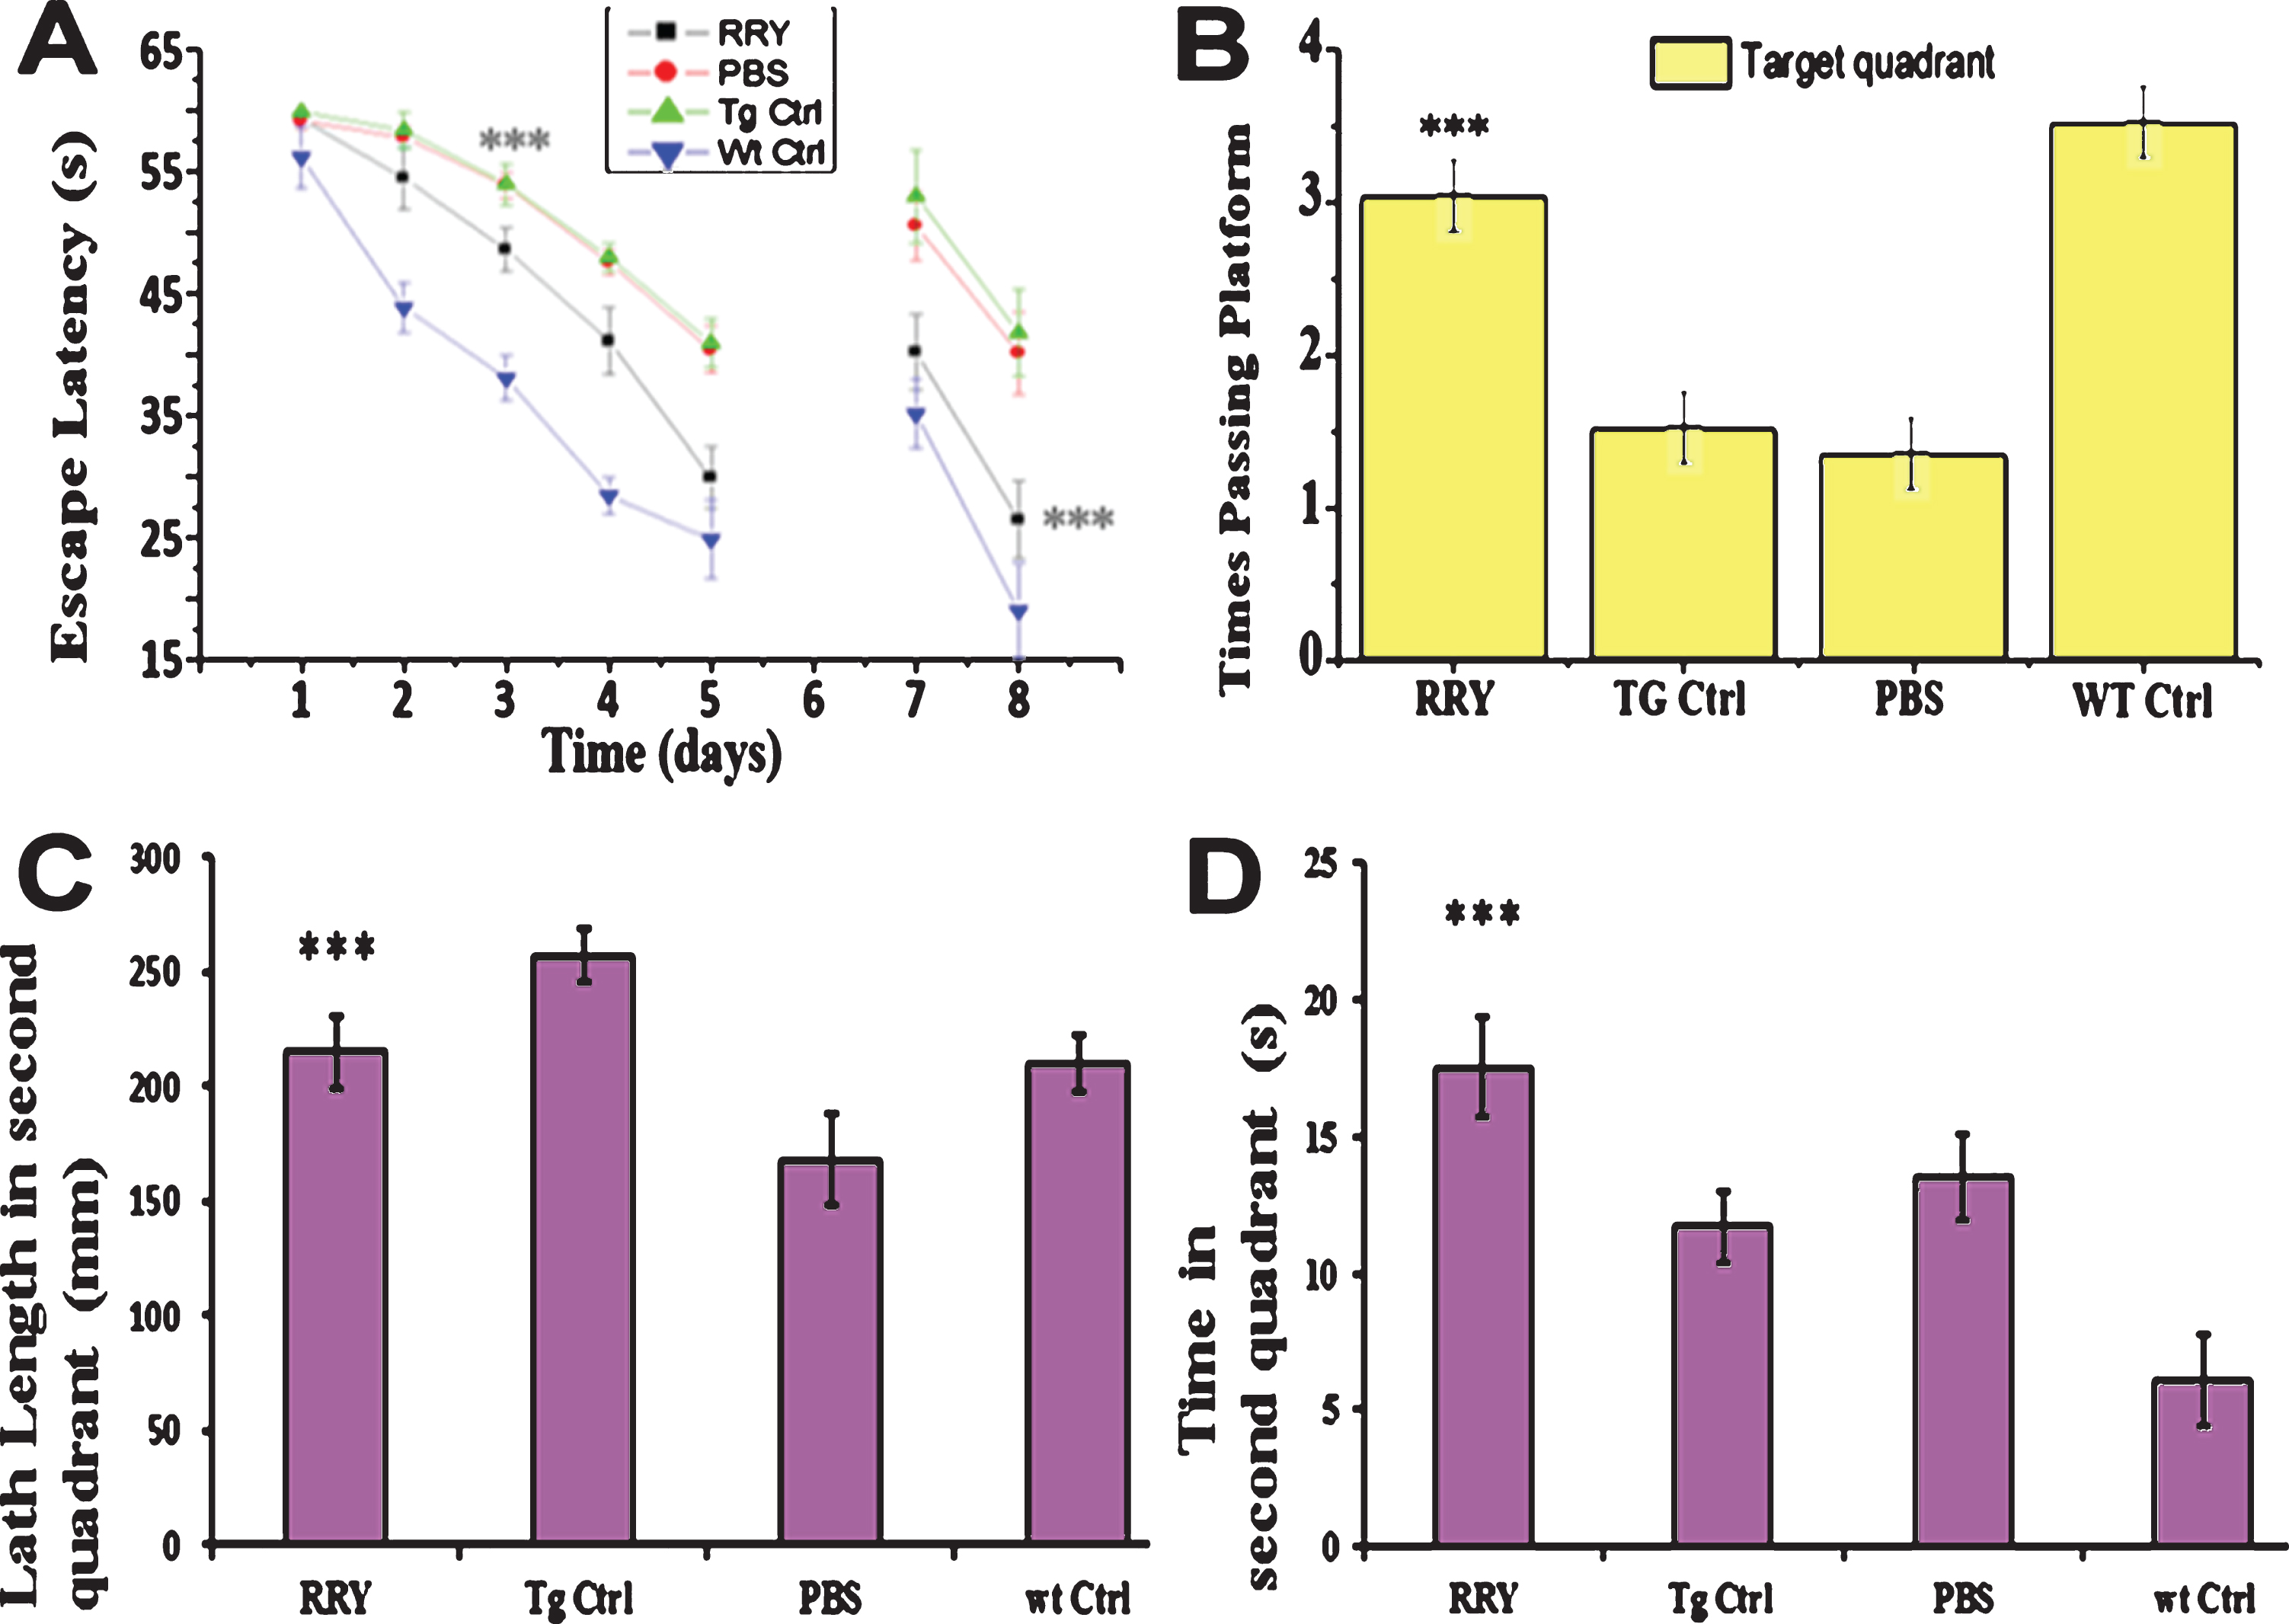 RRY attenuates spatial memories deficit of the APP/PS1 transgenic mice in MWM. A) In the first day of acquisition test (visible platform), no significant difference of escape latencies among groups was observed (p > 0.05). During the 2nd day and the 5th day (hidden platform), the mice infuse with RRY showed a shorter latency compared to groups Tg Vehicle and Tg Ctrl (***p < 0.001). In the reversal test, a significant disparity was shown in the 7th and the 8th day (***p < 0.001). B-D) In the probe test on the 6th day, the mice of group RRY pass the platform area more frequently (B) (***p < 0.001), had longer path length (C) (p < 0.01), and stay longer on the platform (D) (***p < 0.001) in the target quadrant than group vehicle and group Tg Ctrl. n = 7.